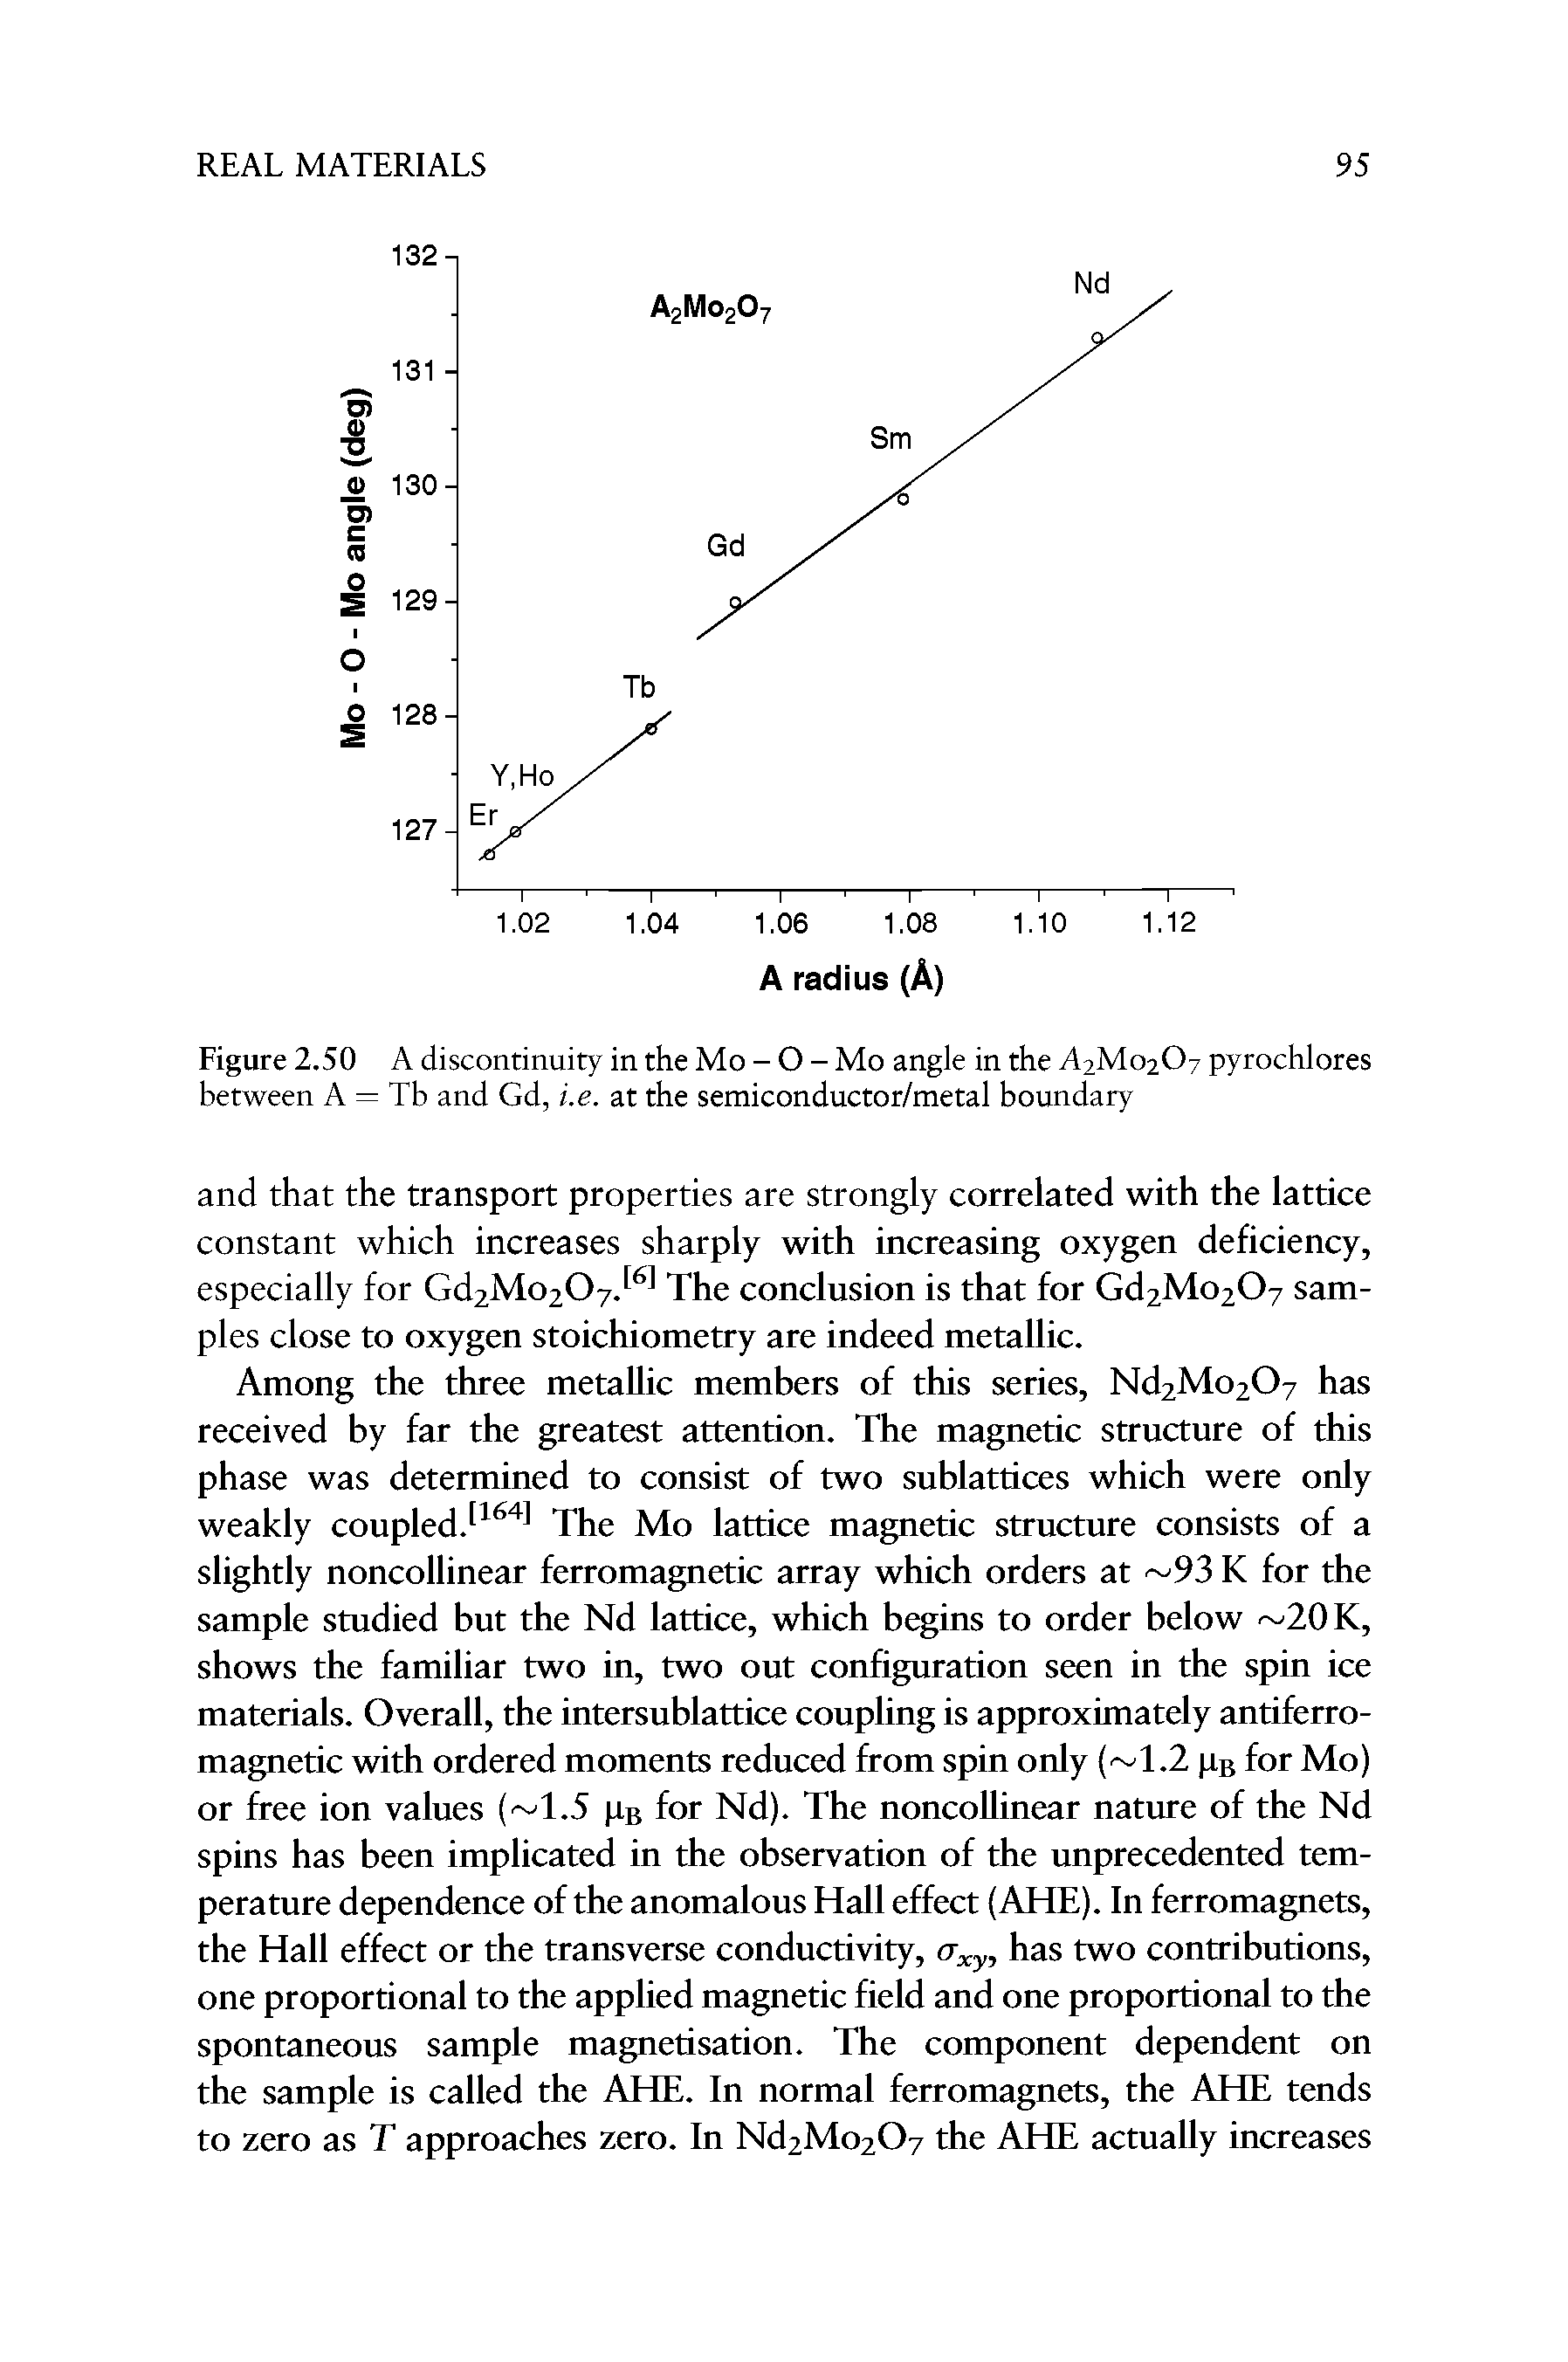 Figure 2.50 A discontinuity in the Mo - O - Mo angle in the A2M02O7 pyrochlores between A = Tb and Gd, i.e. at the semiconductor/metal boundary...